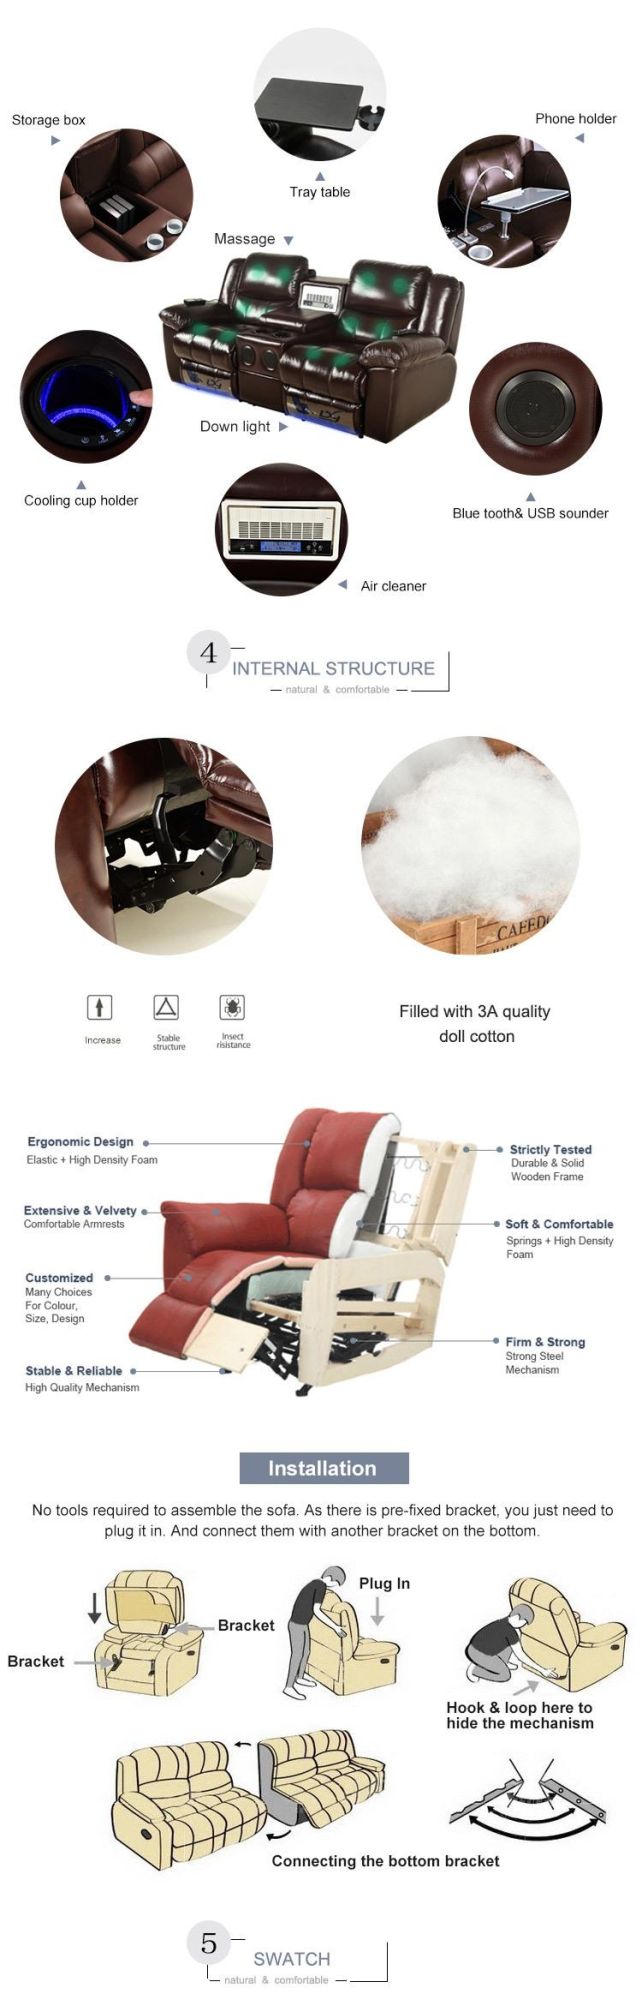 Chinese Top Grain Hafl Leather Home Movie Theater Cinema Manual Recliner Sofa Home Furniture